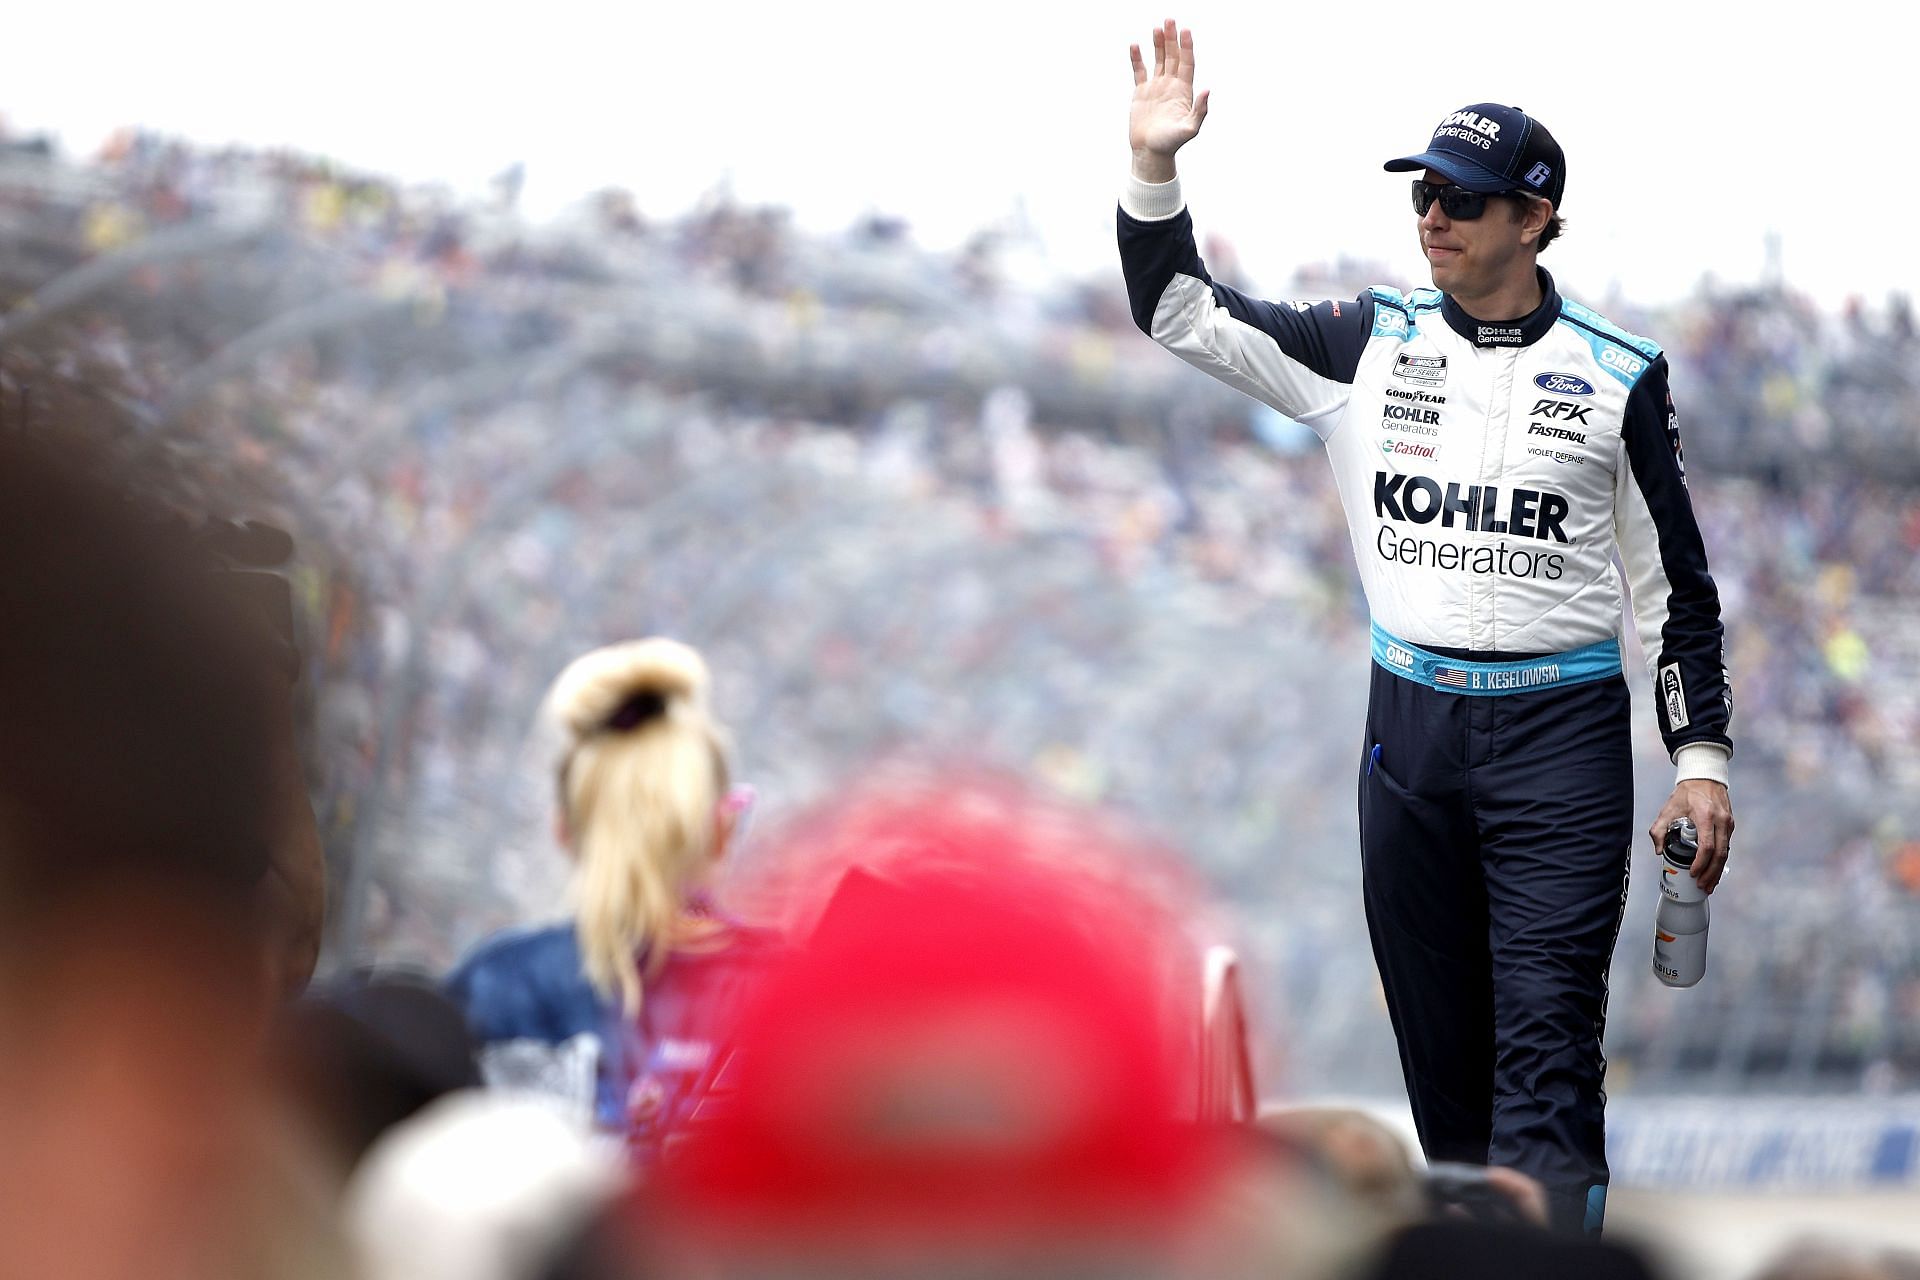 Brad Keslowski waves to fans during the driver intros prior to the NASCAR Cup Series DuraMAX Drydene 400 presented by RelaDyne at Dover Motor Speedway. (Photo by Sean Gardner/Getty Images)